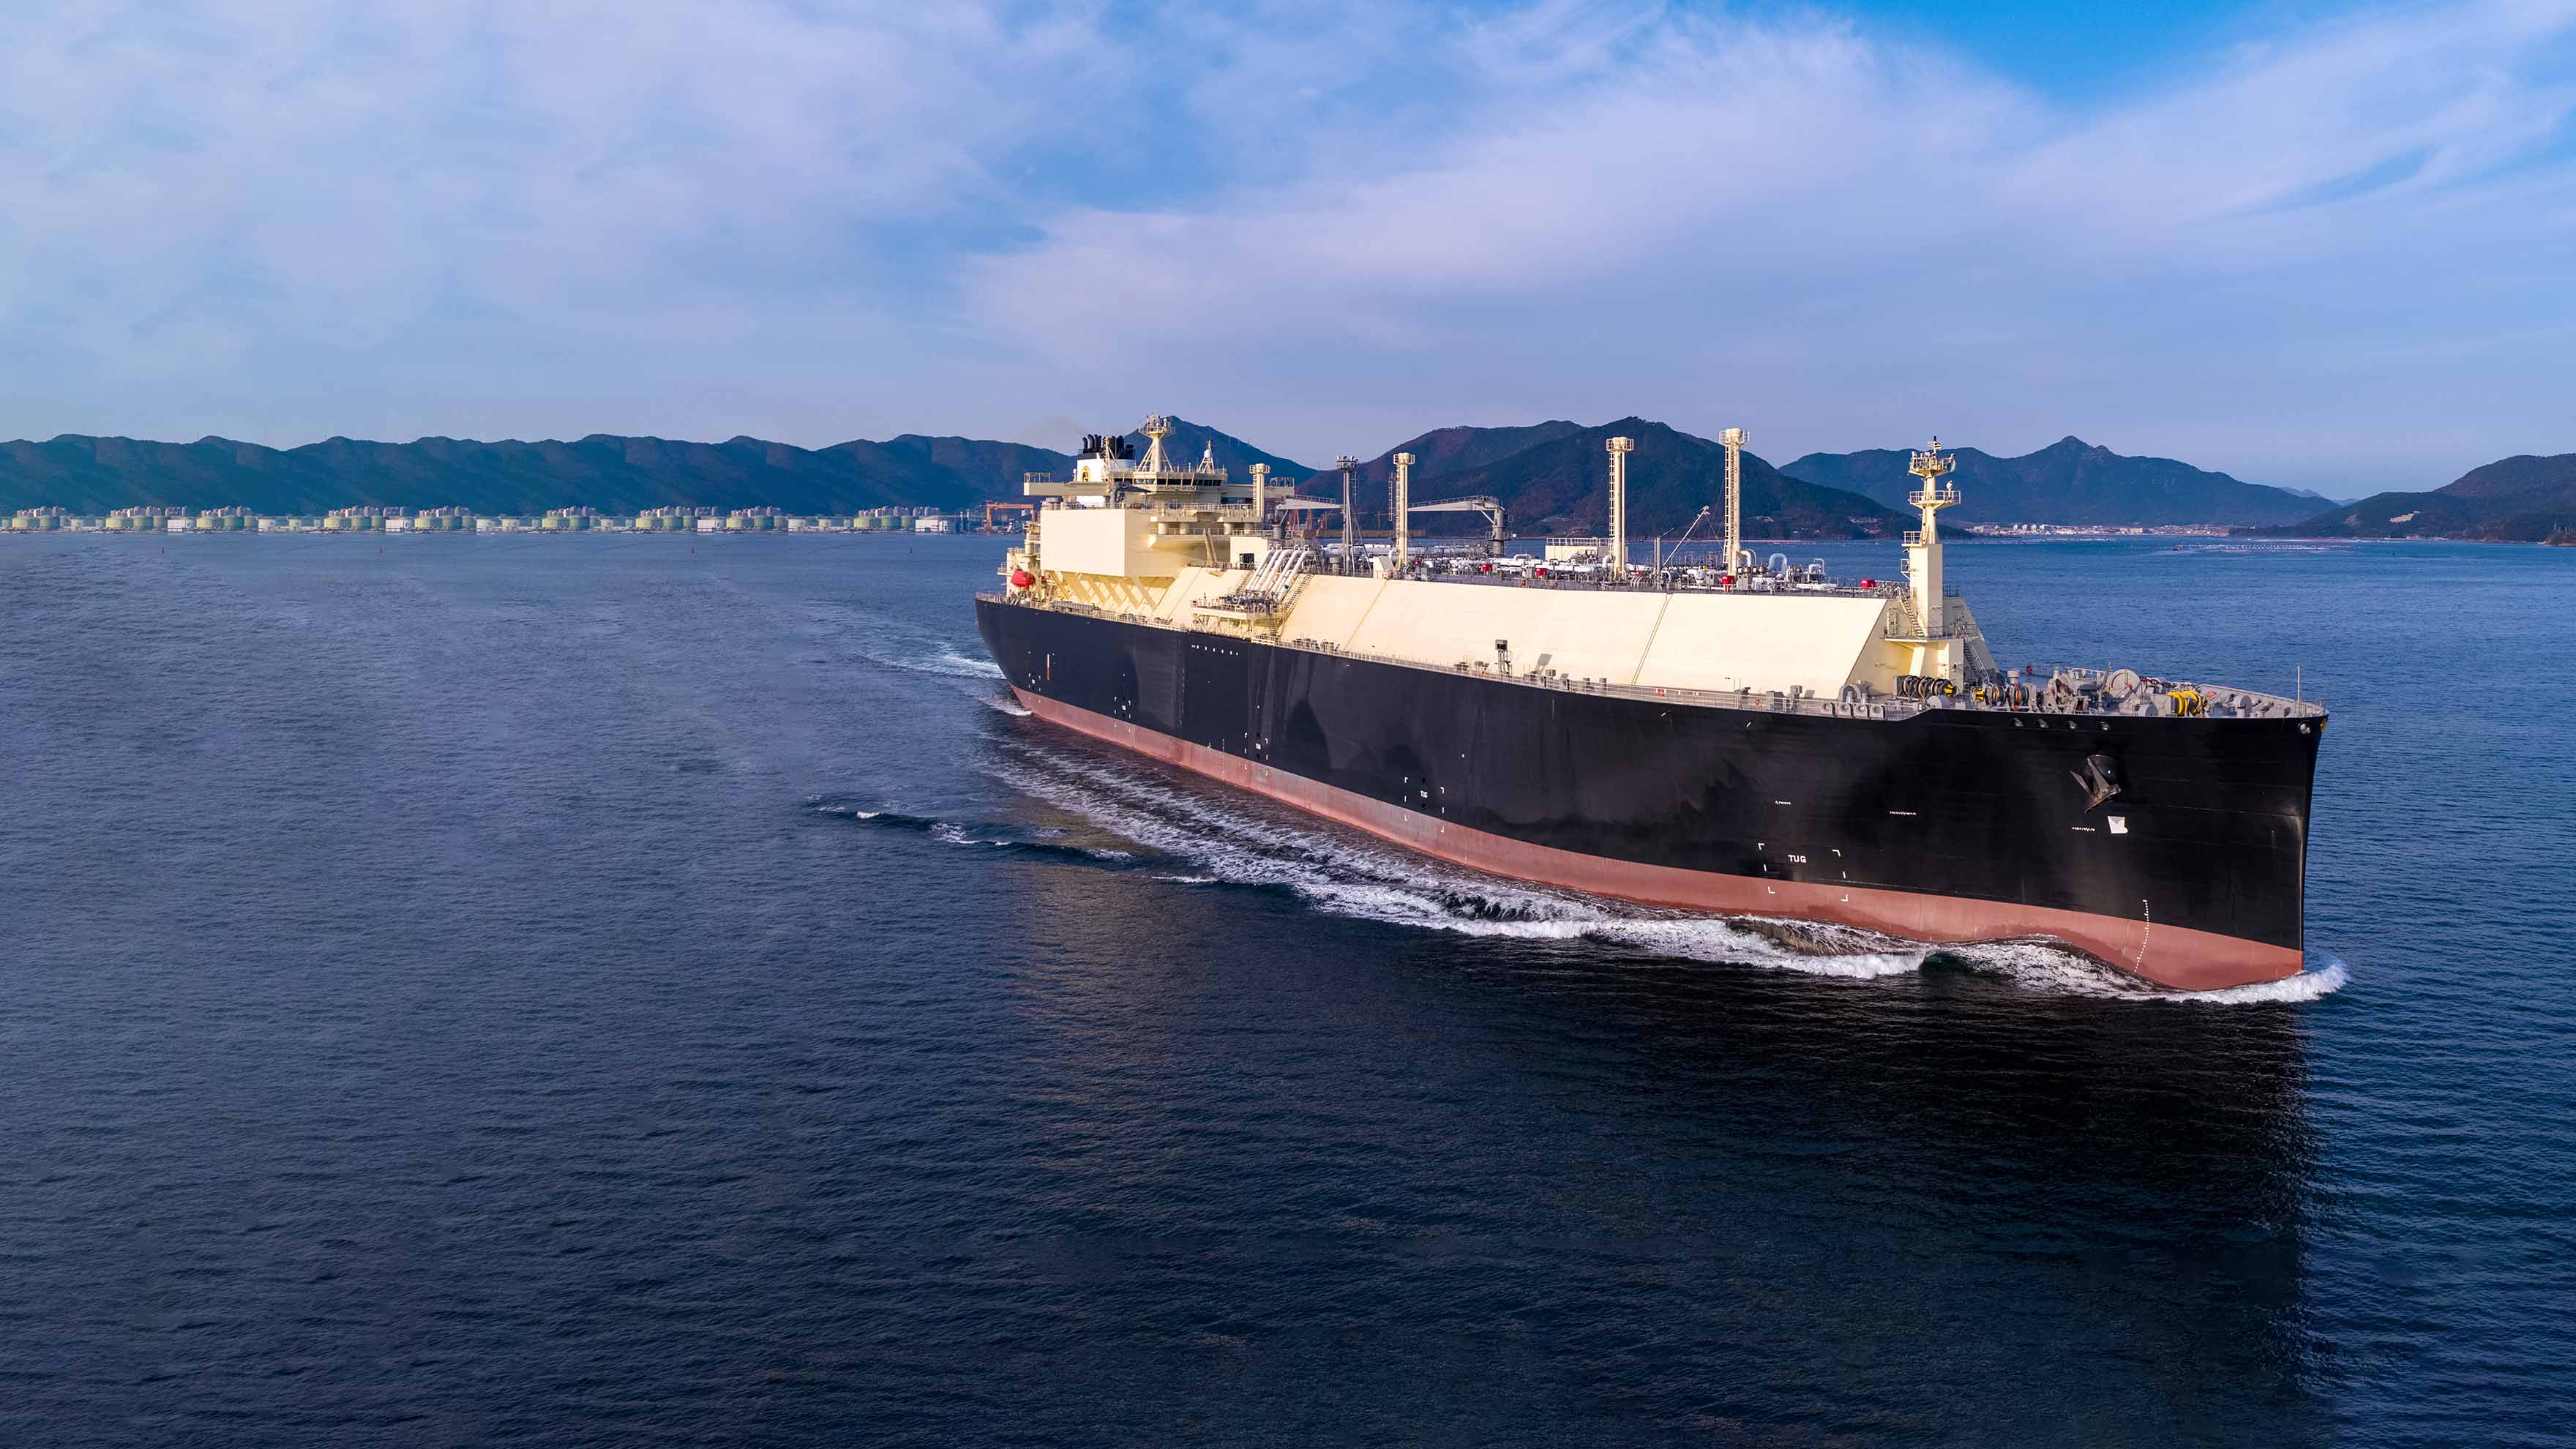 Hanwha develops LNG carriers equipped with next-generation green technologies such as rotor sails.